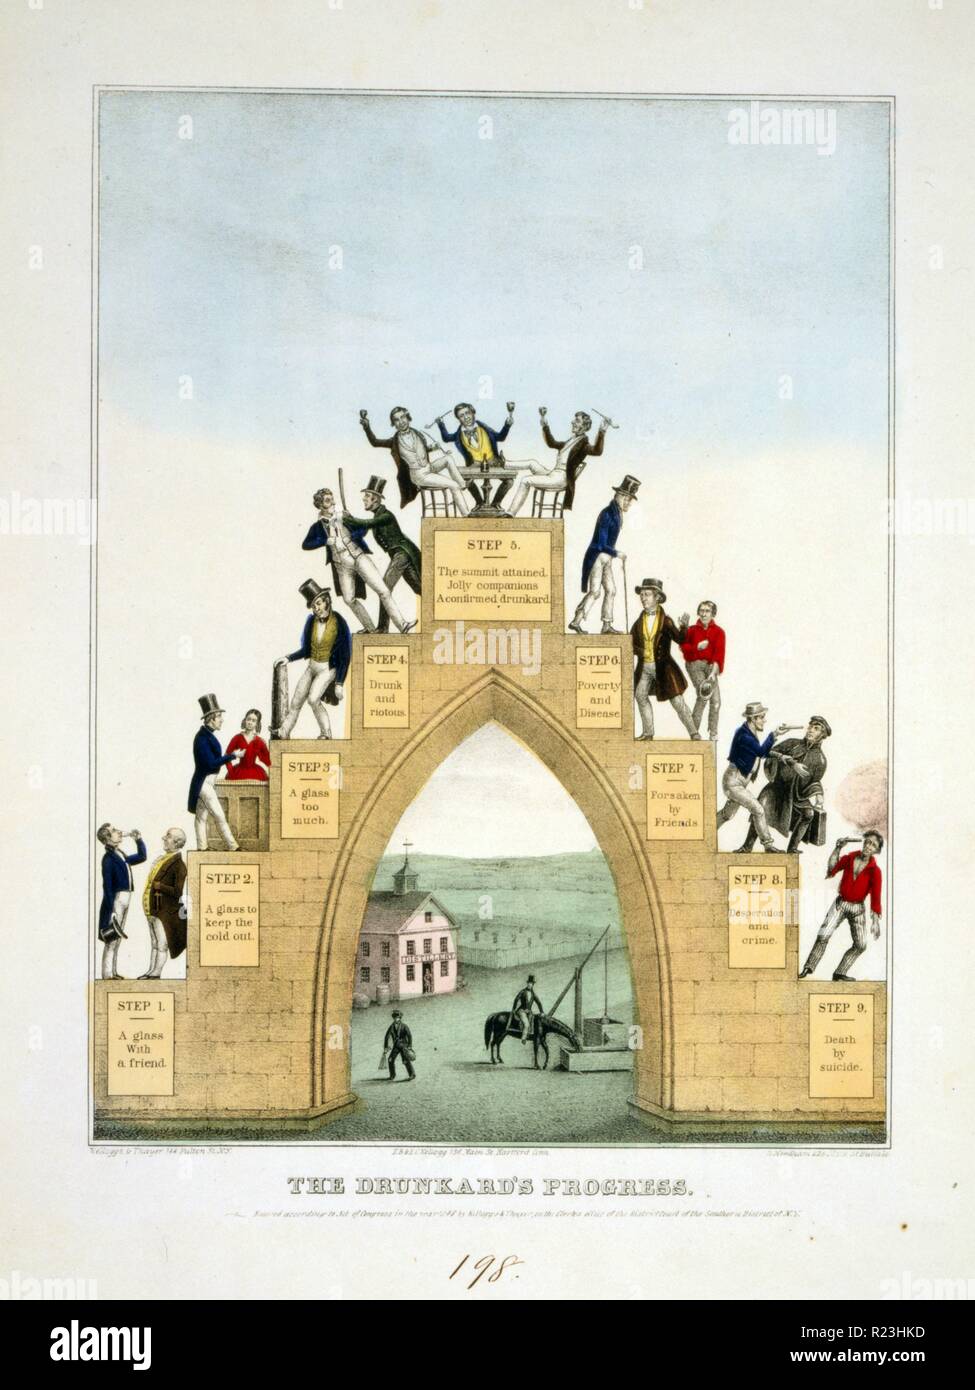 The drunkard's progress. Print shows an archway of the nine steps of a drunkard's progress, beginning with a man in fancy dress having 'a glass with a friend' and then his gradual decline in society with poverty & disease, criminal activity, becoming a bum, and his eventual 'death by suicide'; two men and a distillery are in the background 1846 Stock Photo